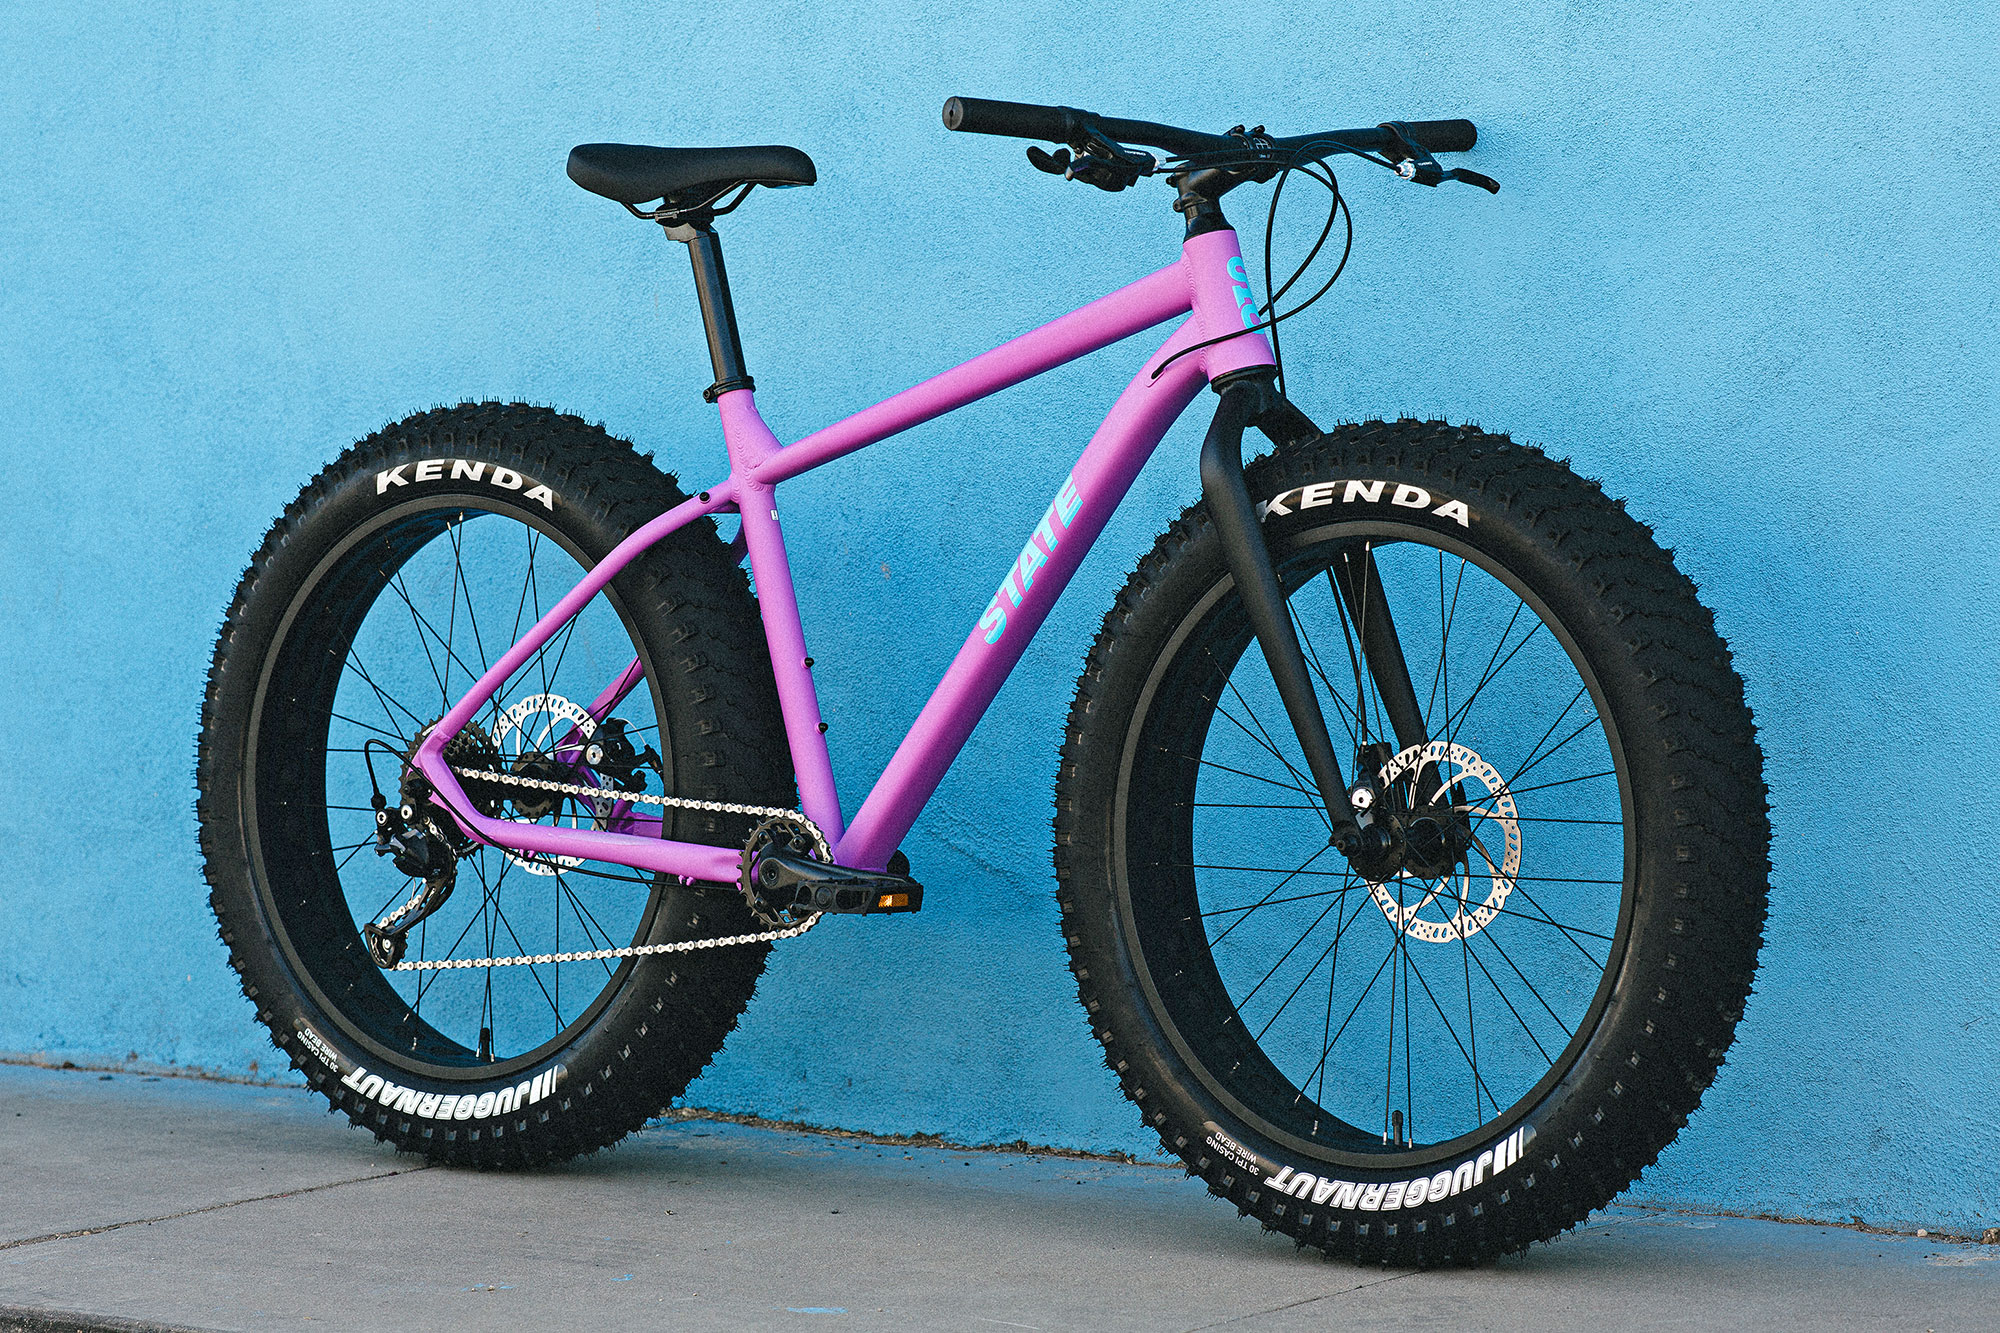 State Bicycle Co. 6061 Trail+ Fat Bike, an affordable alloy budget entry-level aluminum fatbike